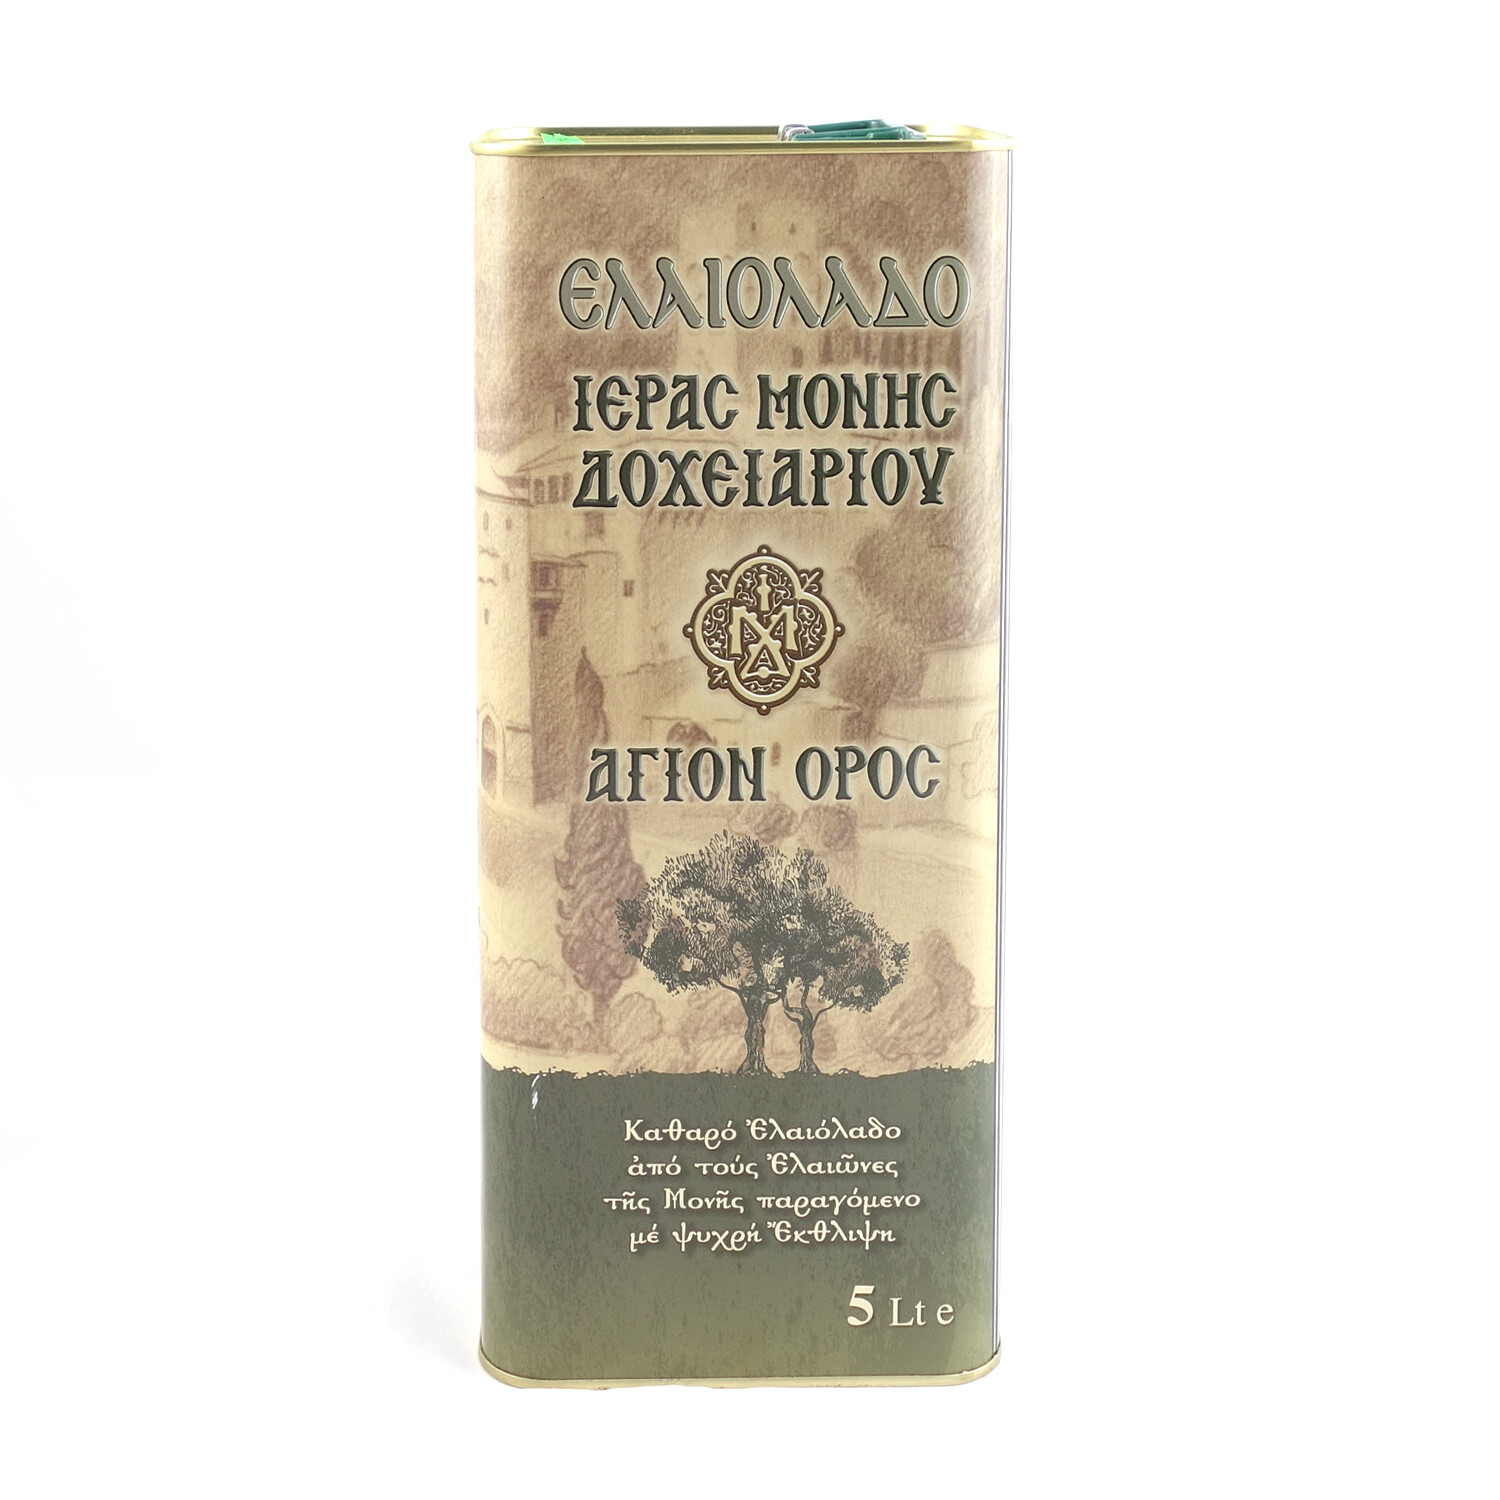 Excellent Virgin Olive Oil of The Docheiariou monastery